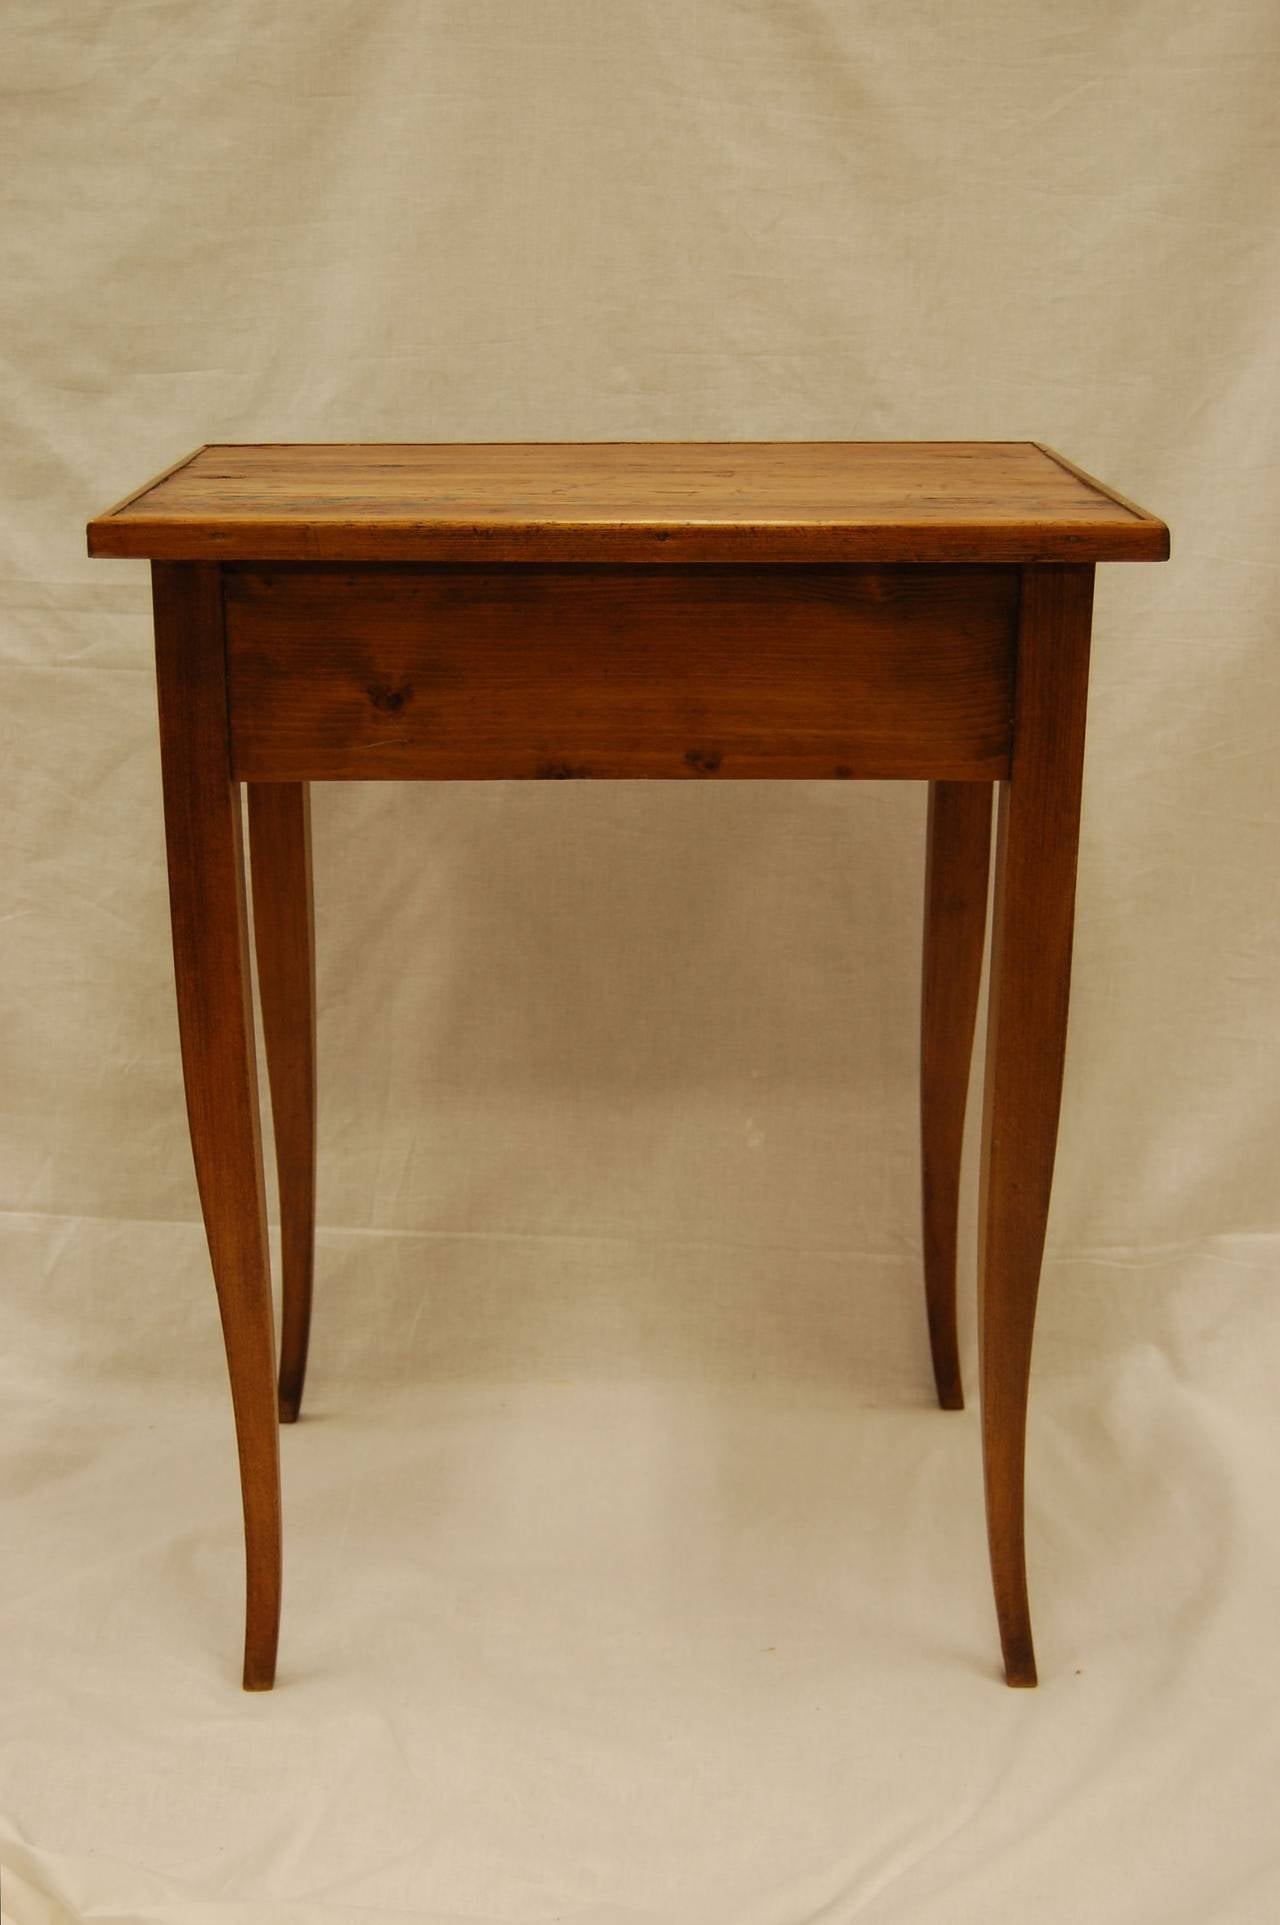 Pine or Ash table with glass knob in excellent condition. This table is said to be from Canada and is French in style.